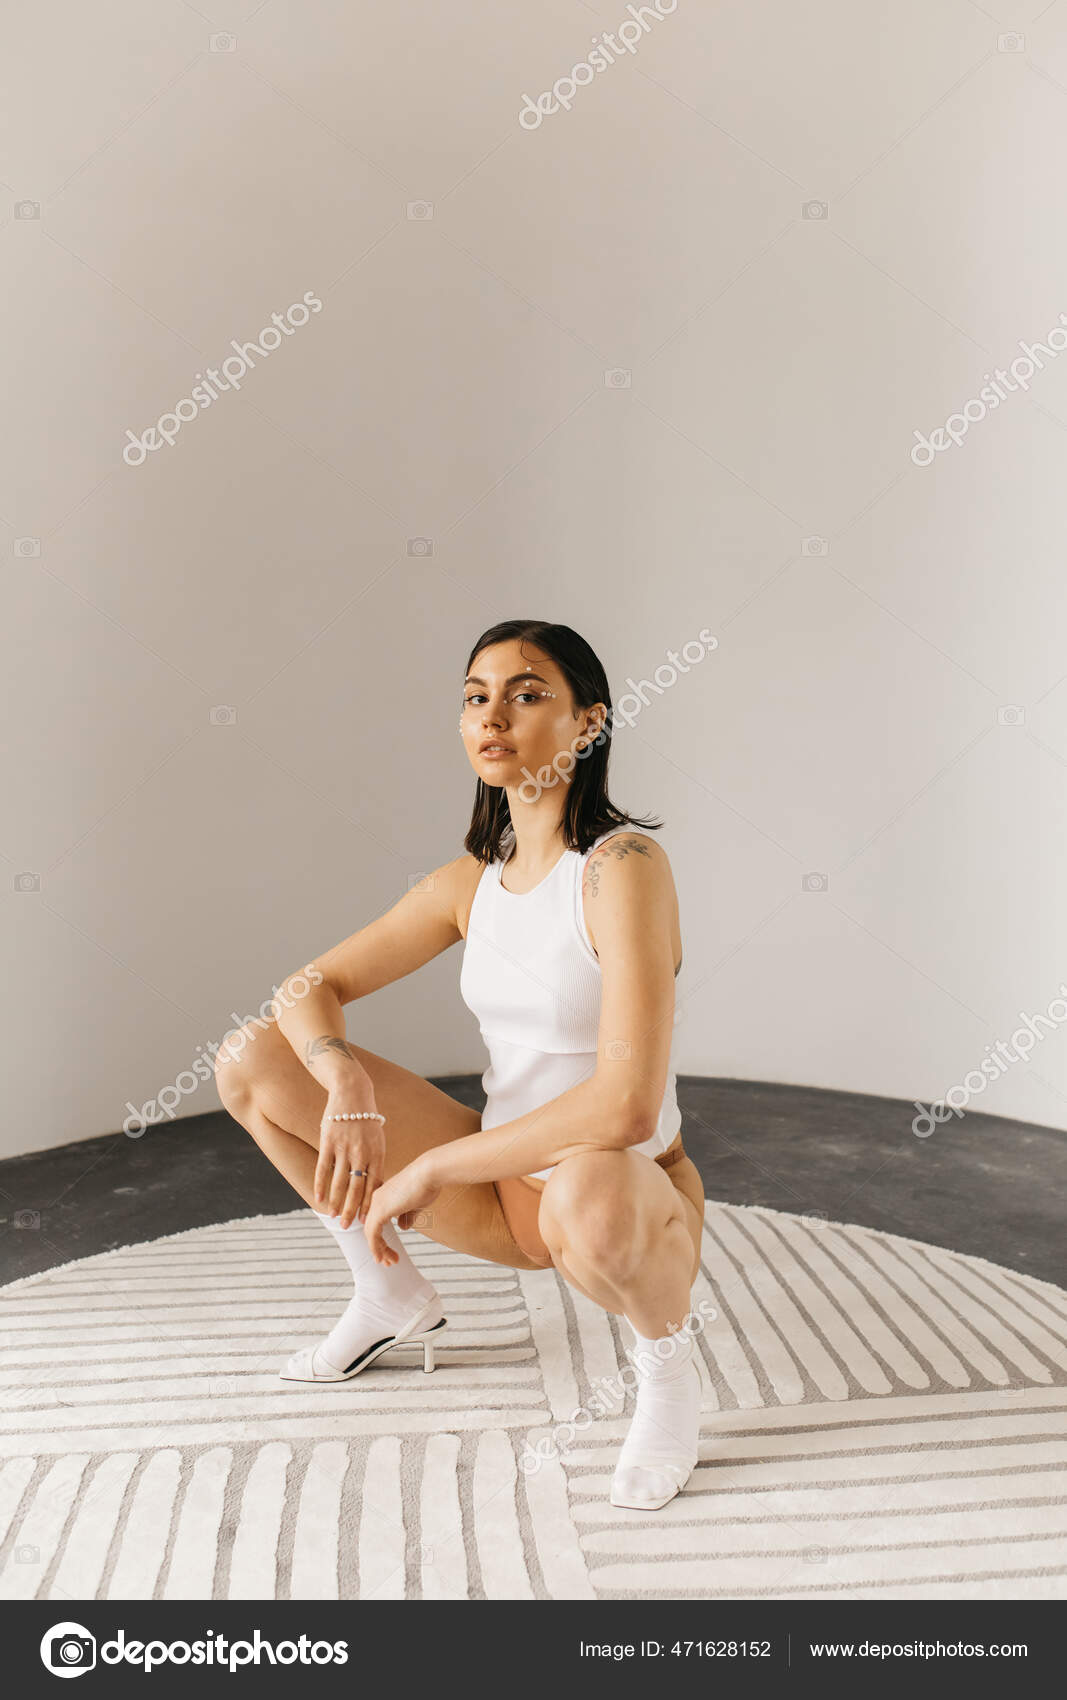 Free: A Woman On A Squat Position - nohat.cc